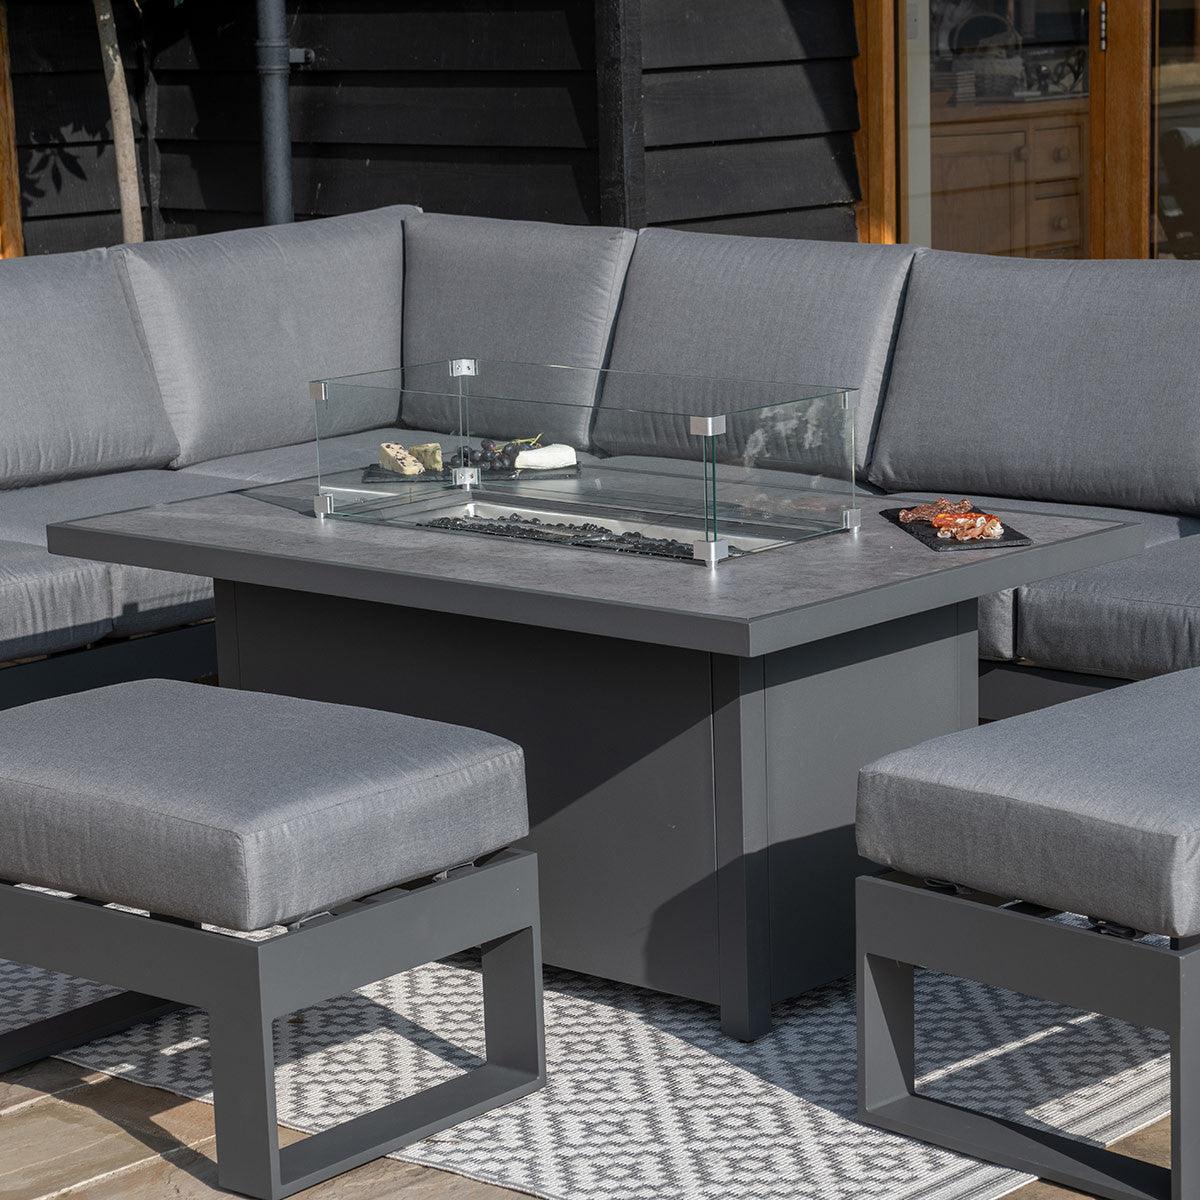 Amalfi Large Corner Group With Fire Pit Table - Vookoo Lifestyle